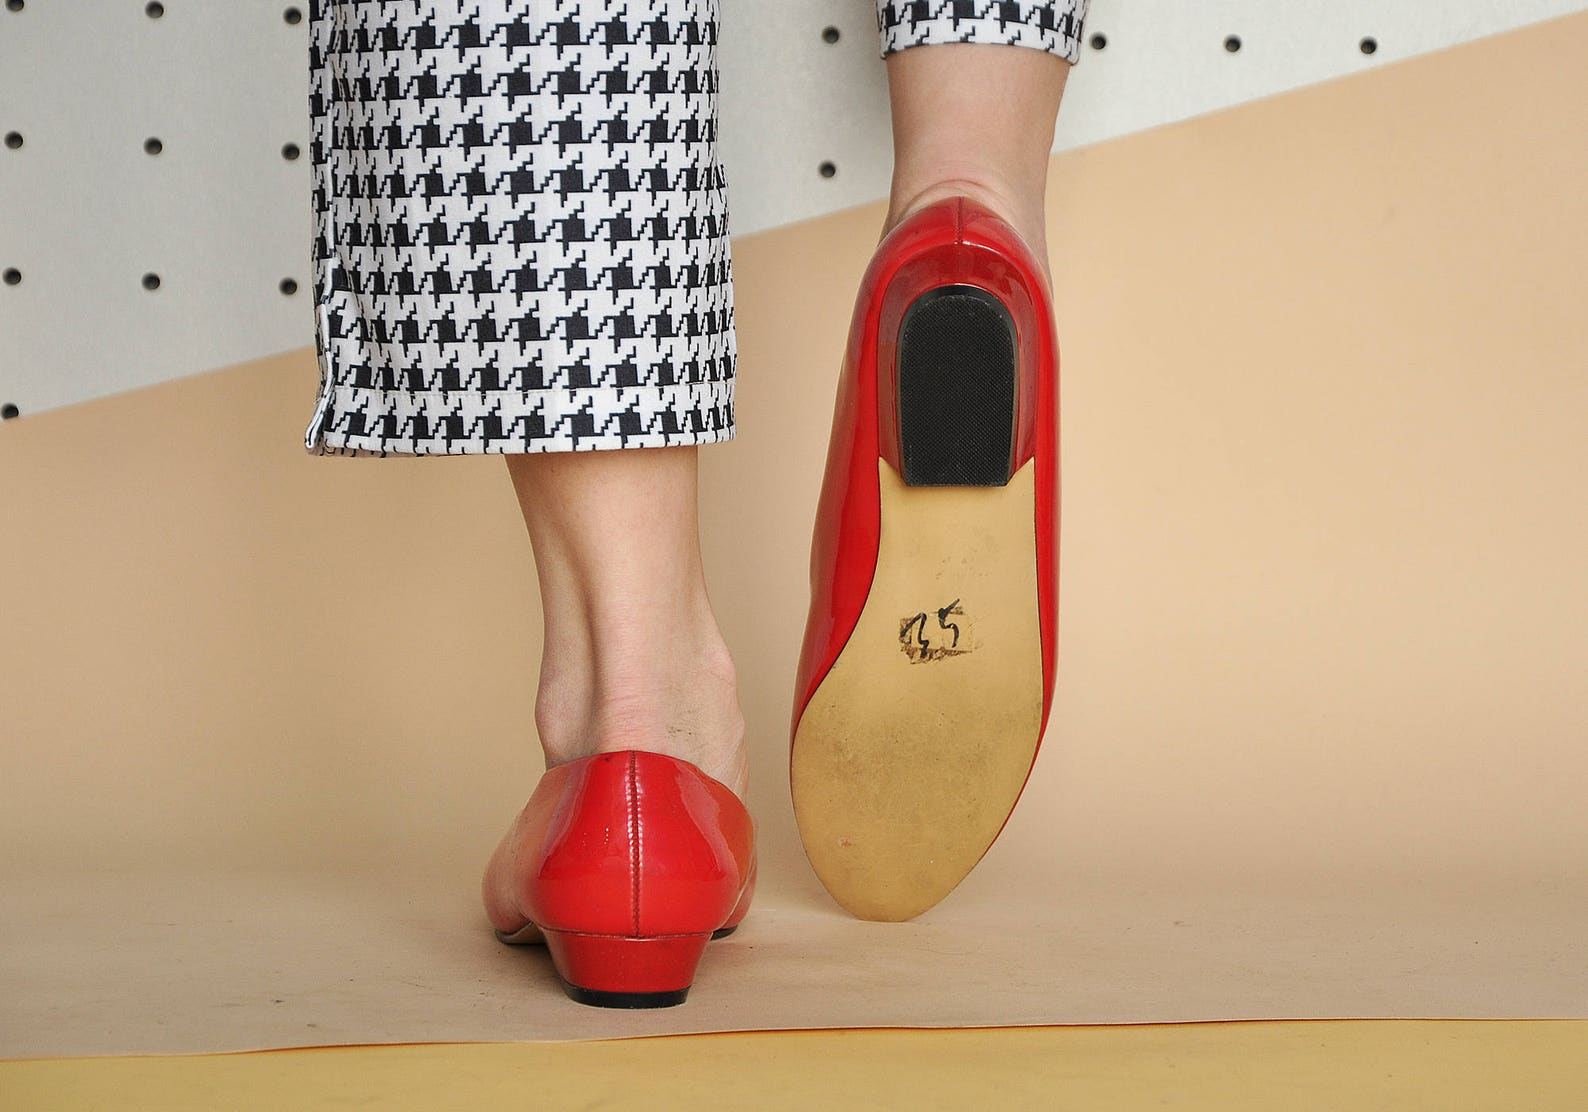 90s mod flats flat shoes red shoes red flats minimal flats minimalist flats funky flats pointy flats red ballet / size 6.5 us /